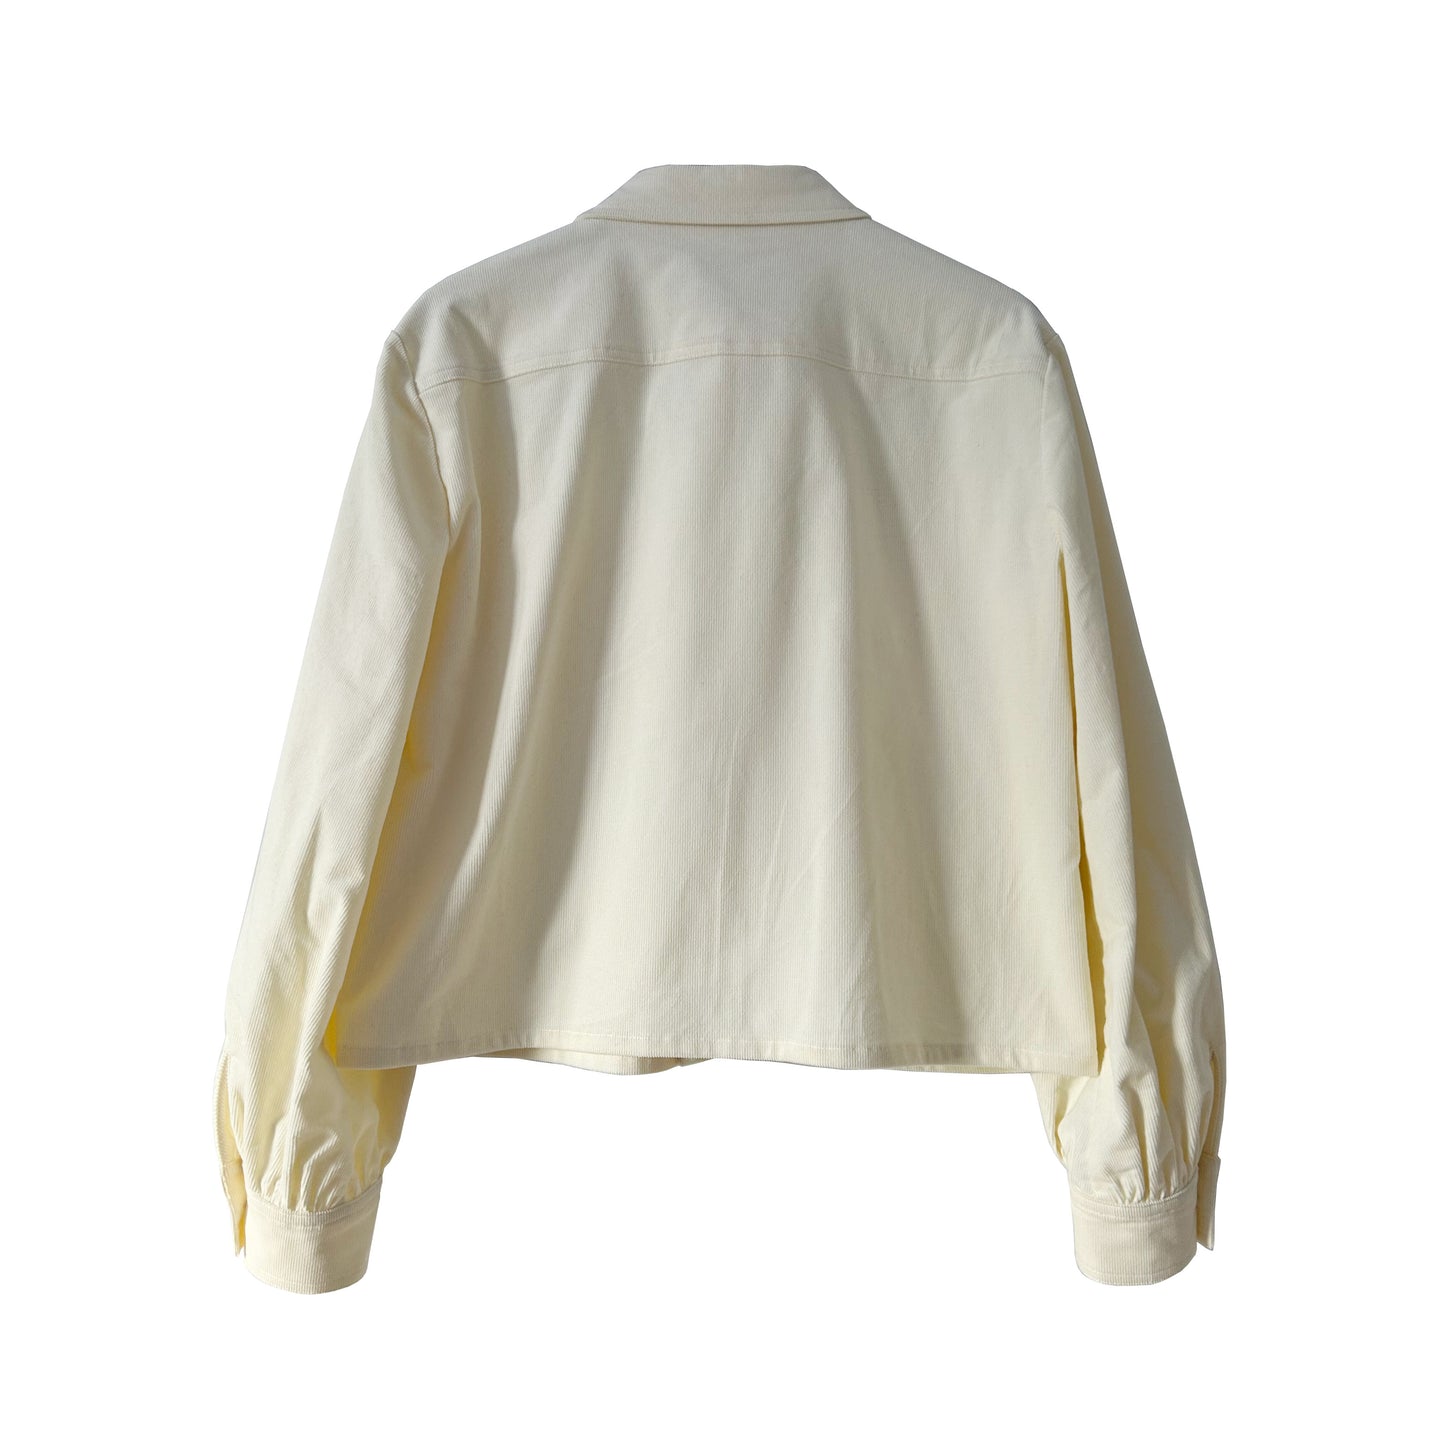 Corduroy Military Blouse in Ivory